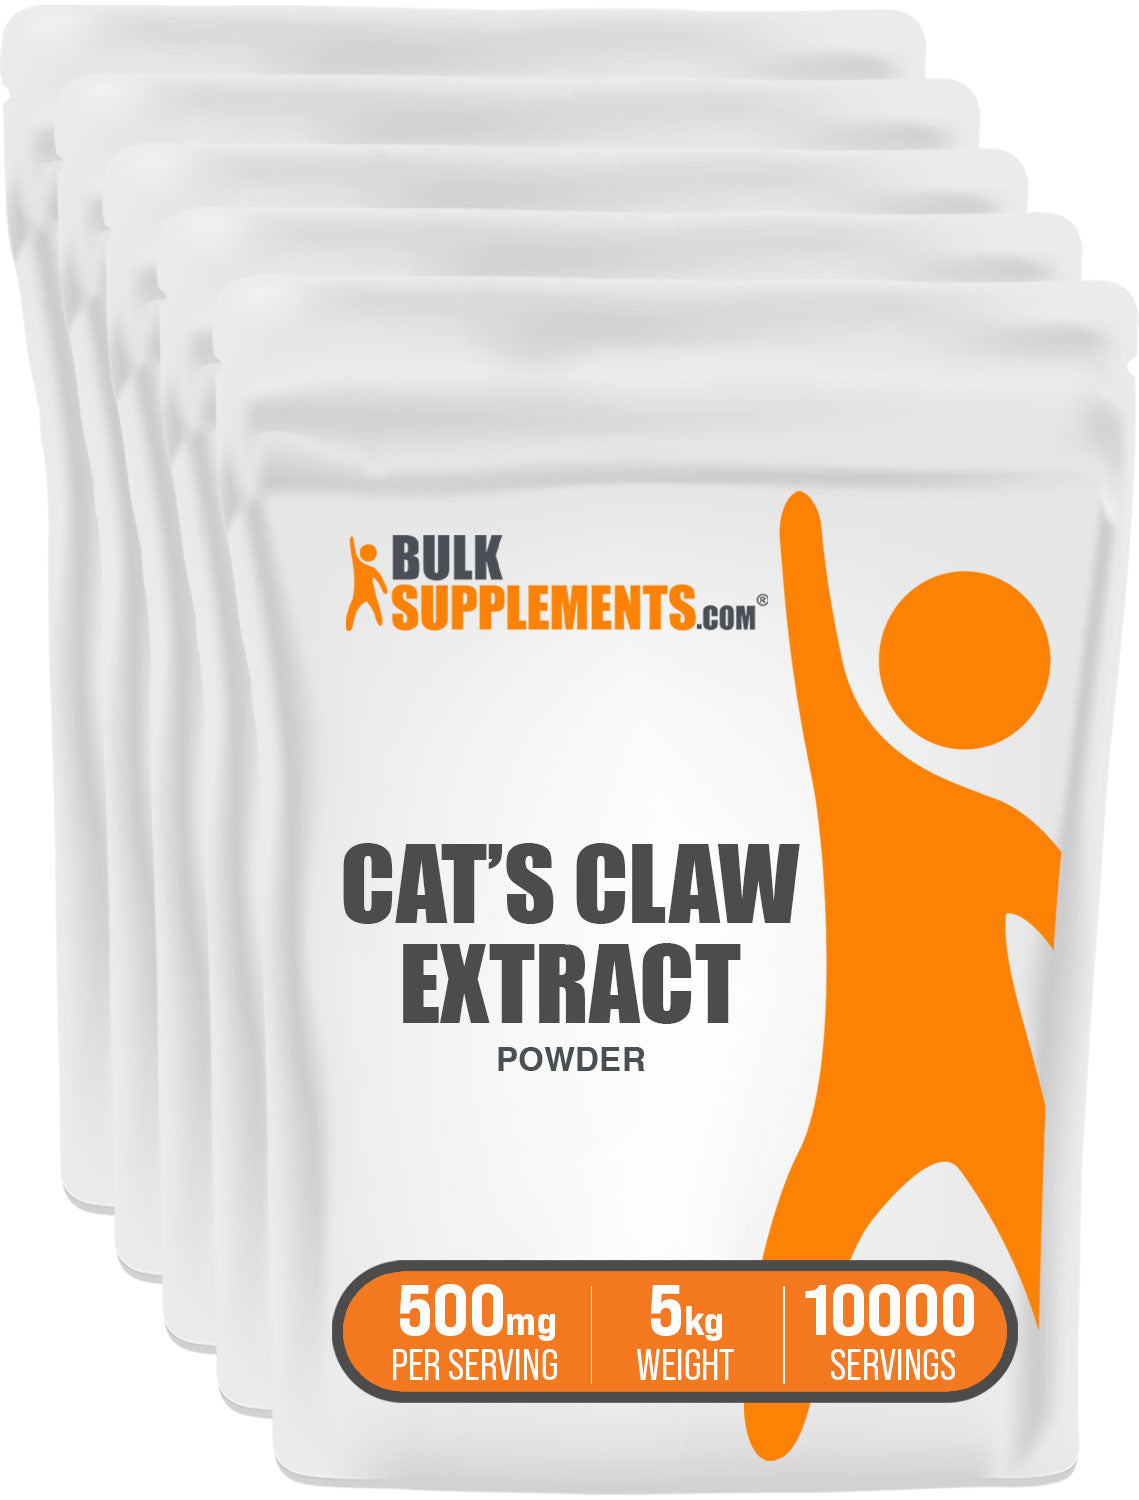 5kg cats claw